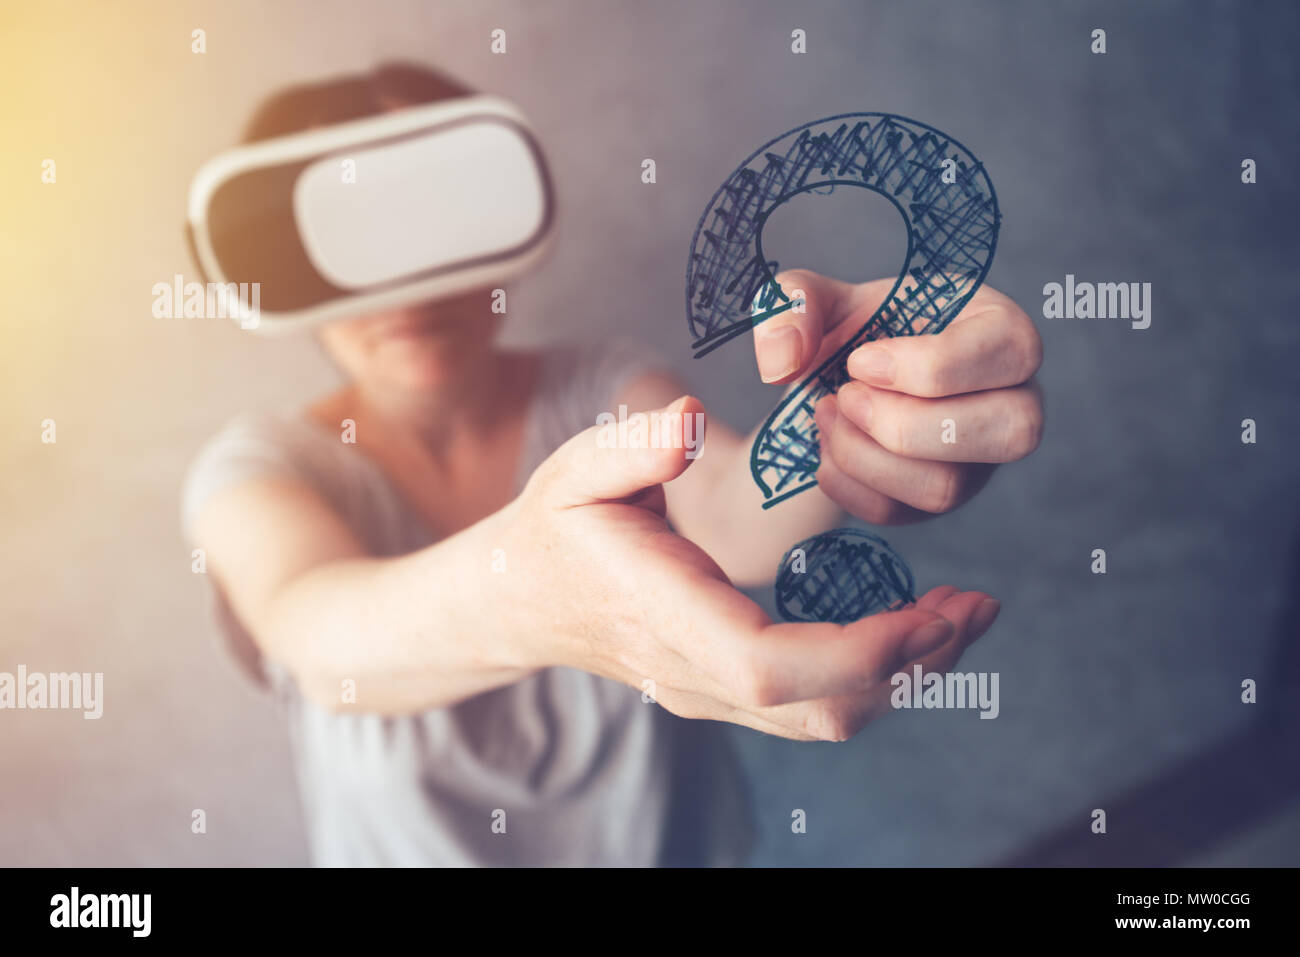 Woman with VR headset holding question mark, female person immersed in virtual reality Stock Photo